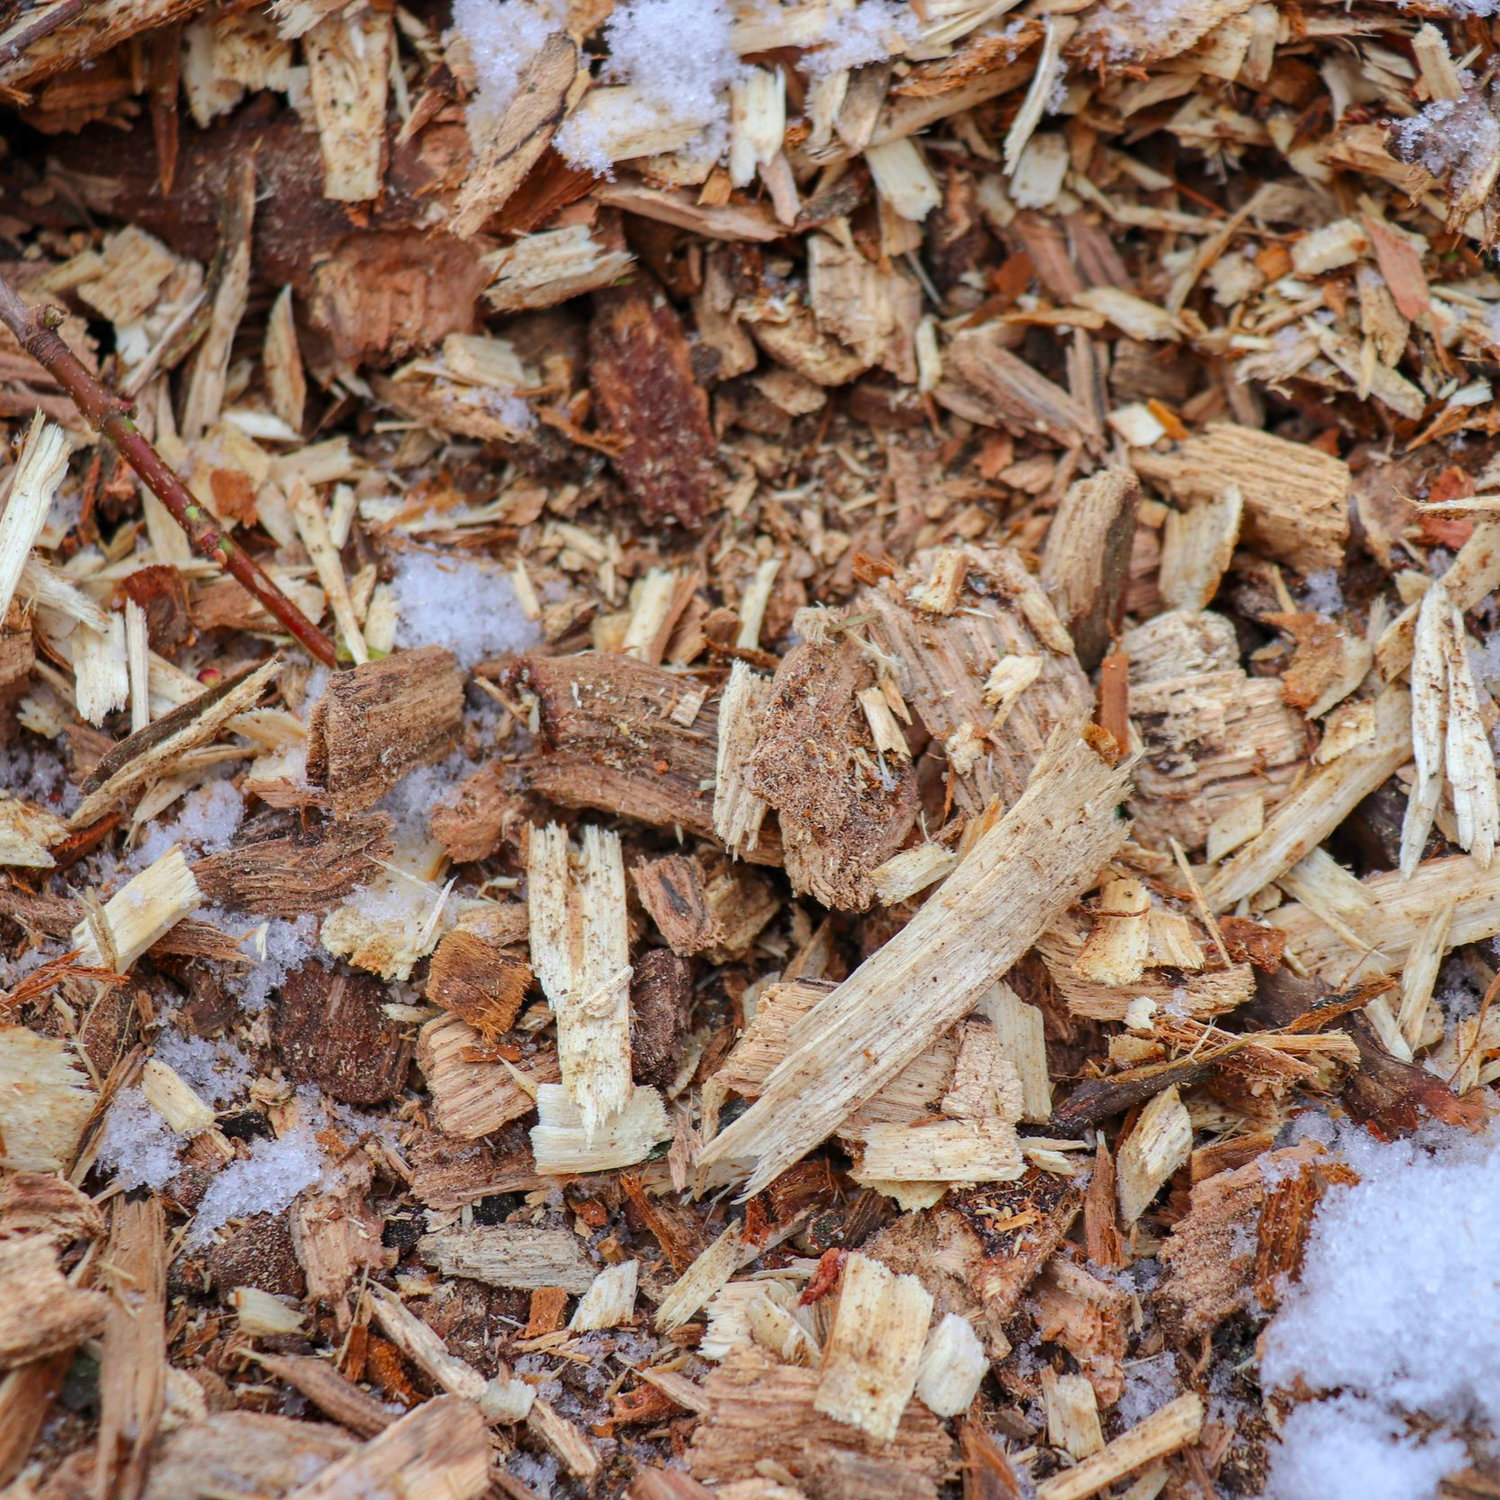 MULCH//Are Wood Chips Harmful to Gardens?